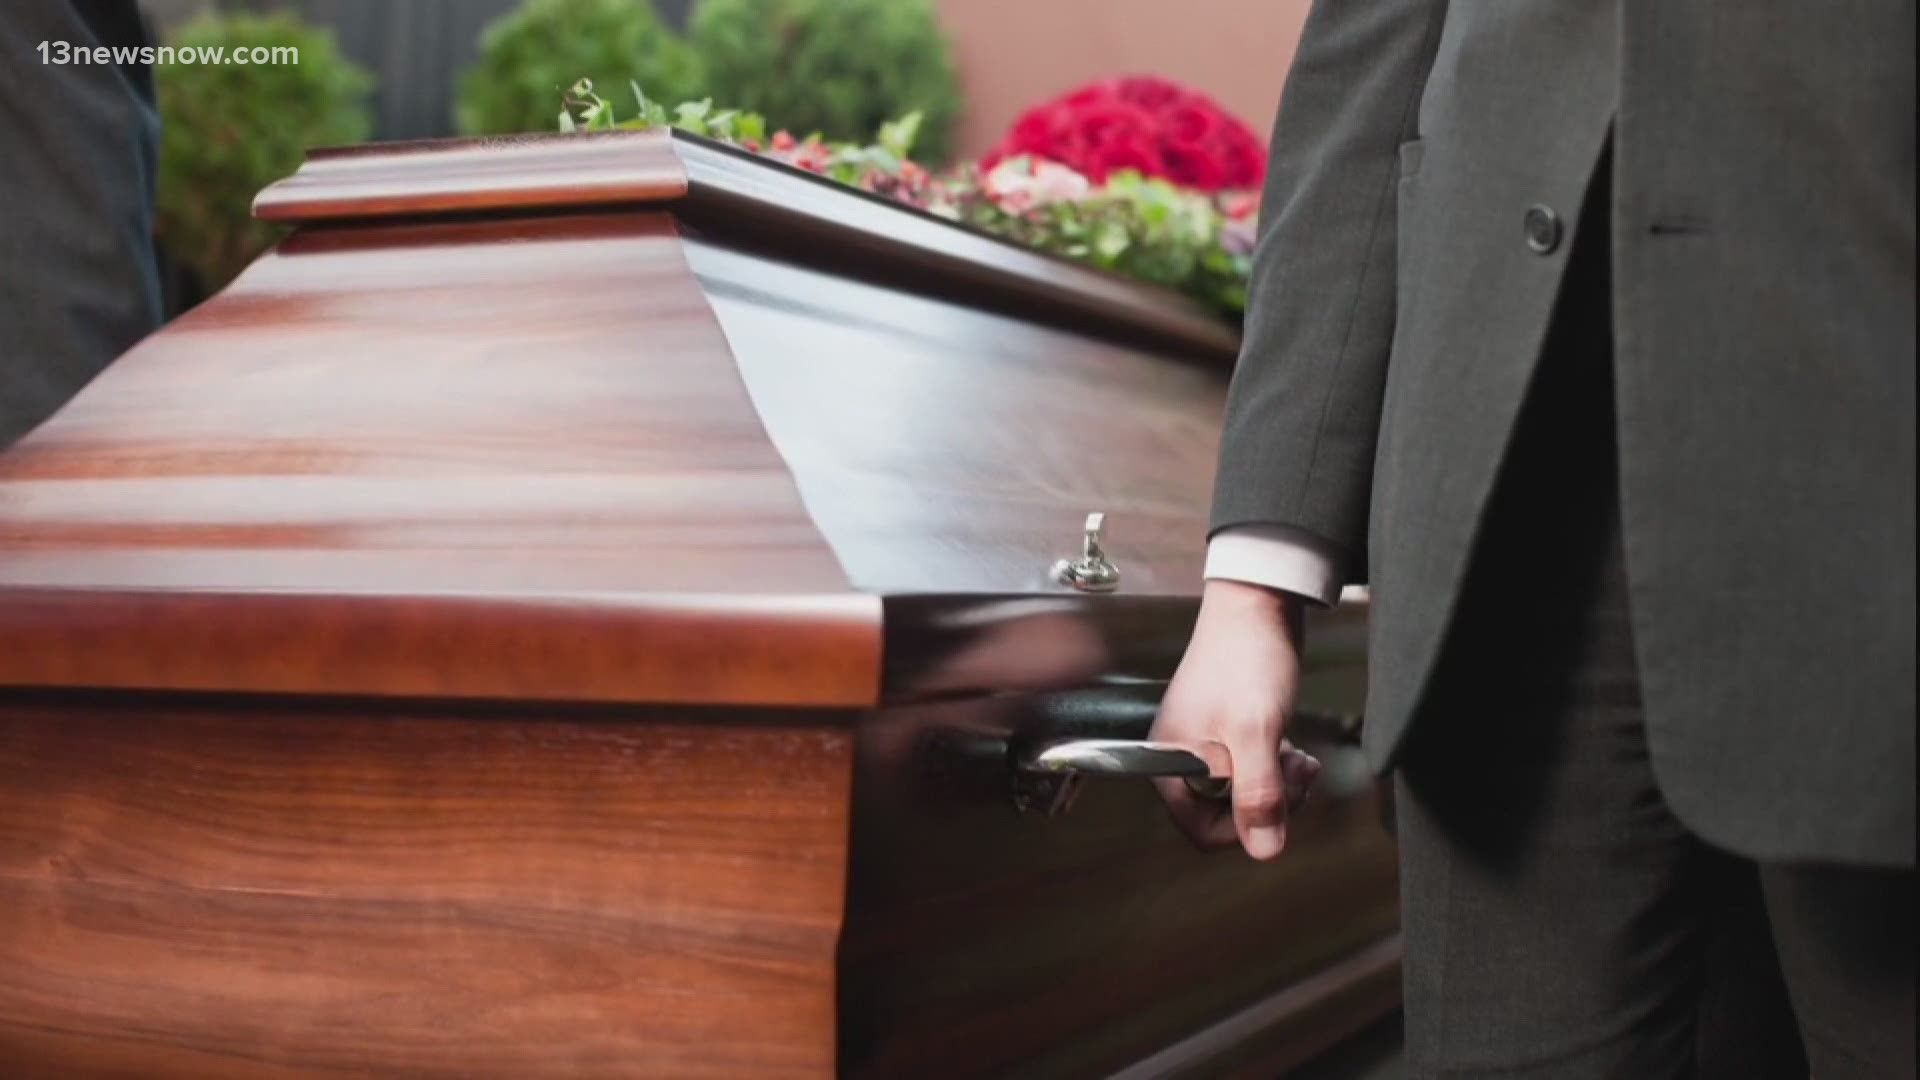 The rising cases have been stressful for funeral home resources and are having an effect on employees' mental health.